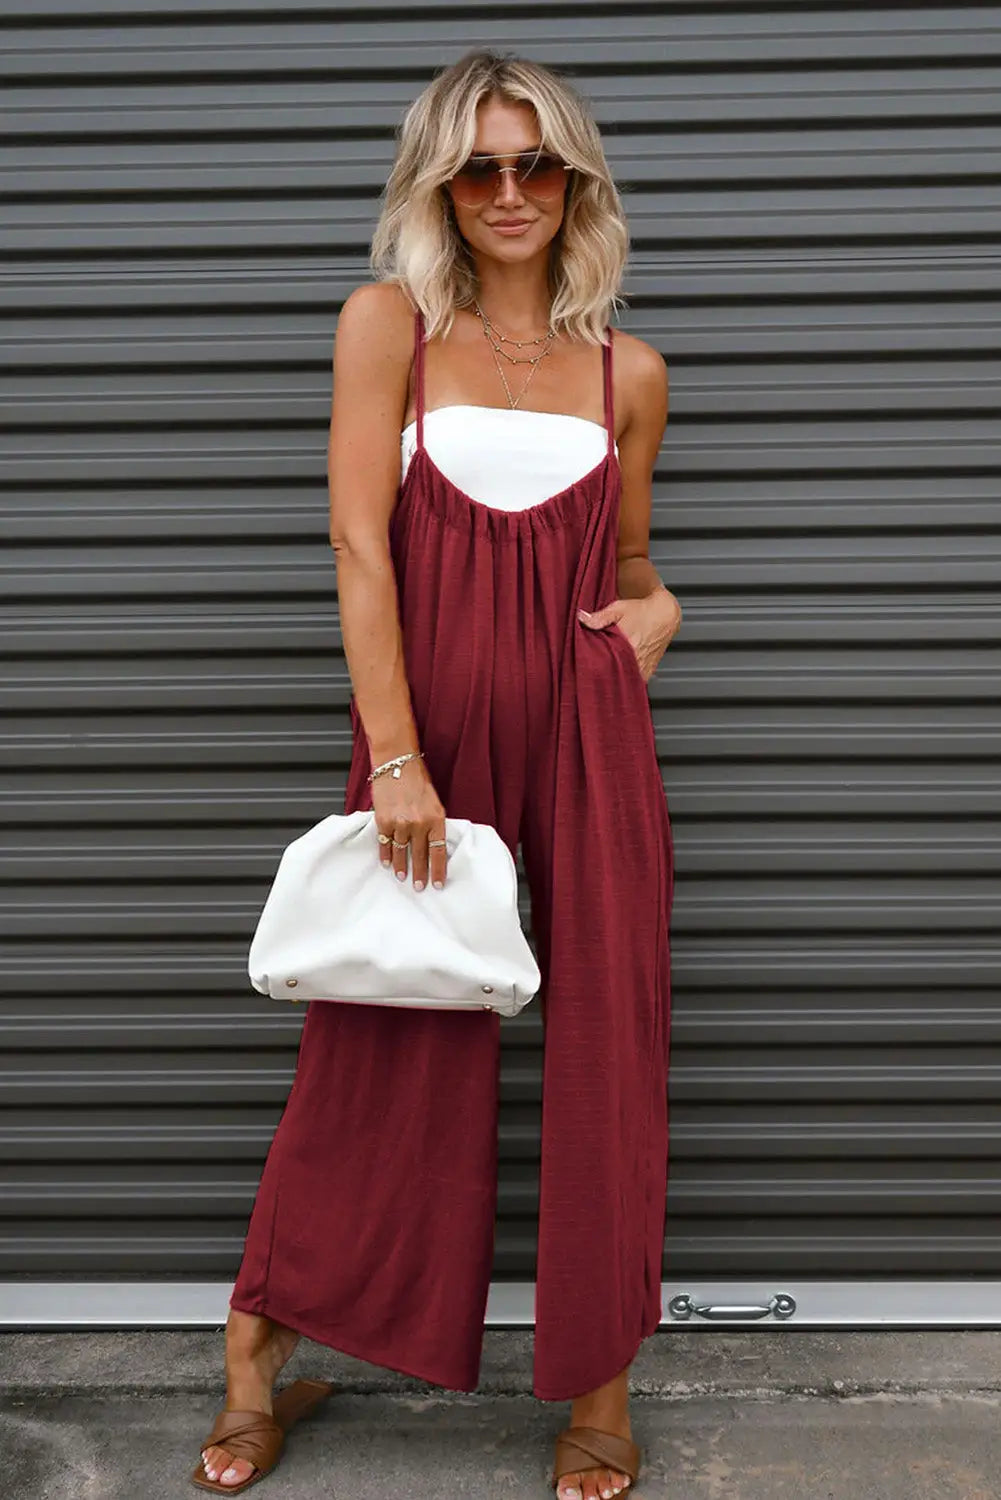 Gray solid spaghetti strap wide leg overall - jumpsuits & rompers